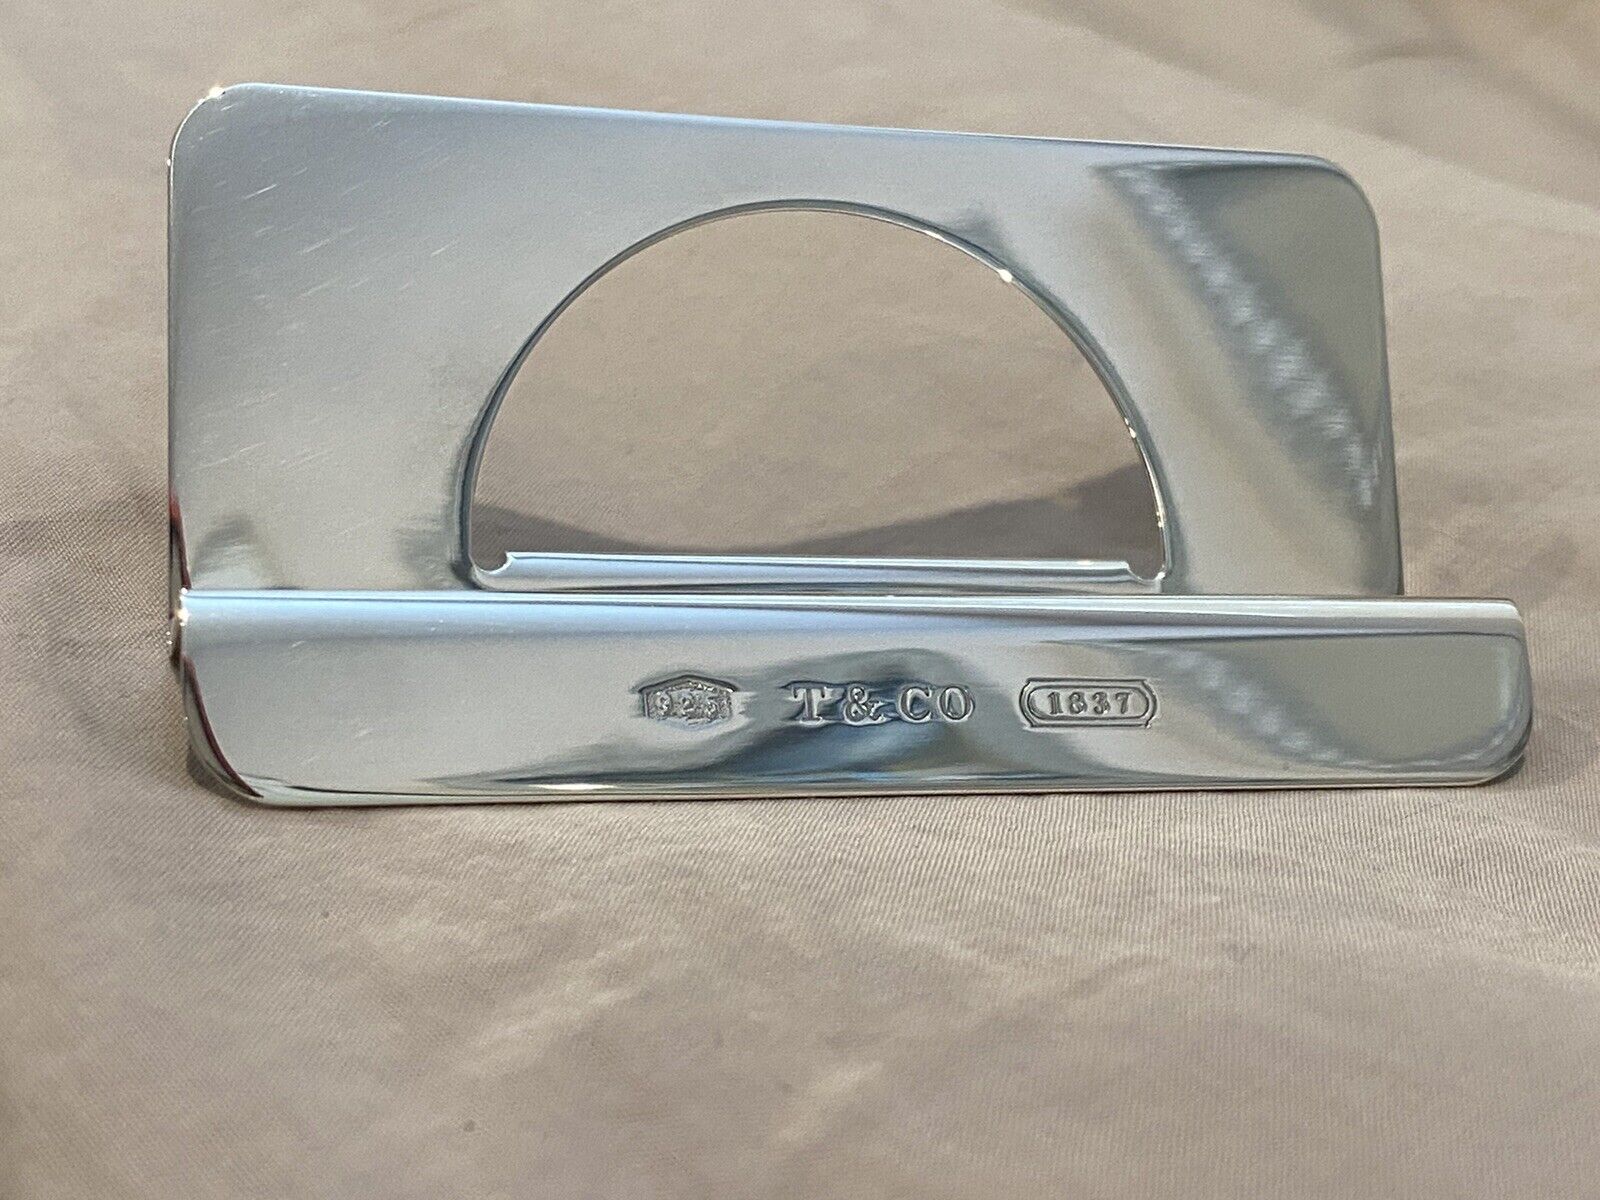 Tiffany & Co. Sterling Silver 1837 Business Card Holder